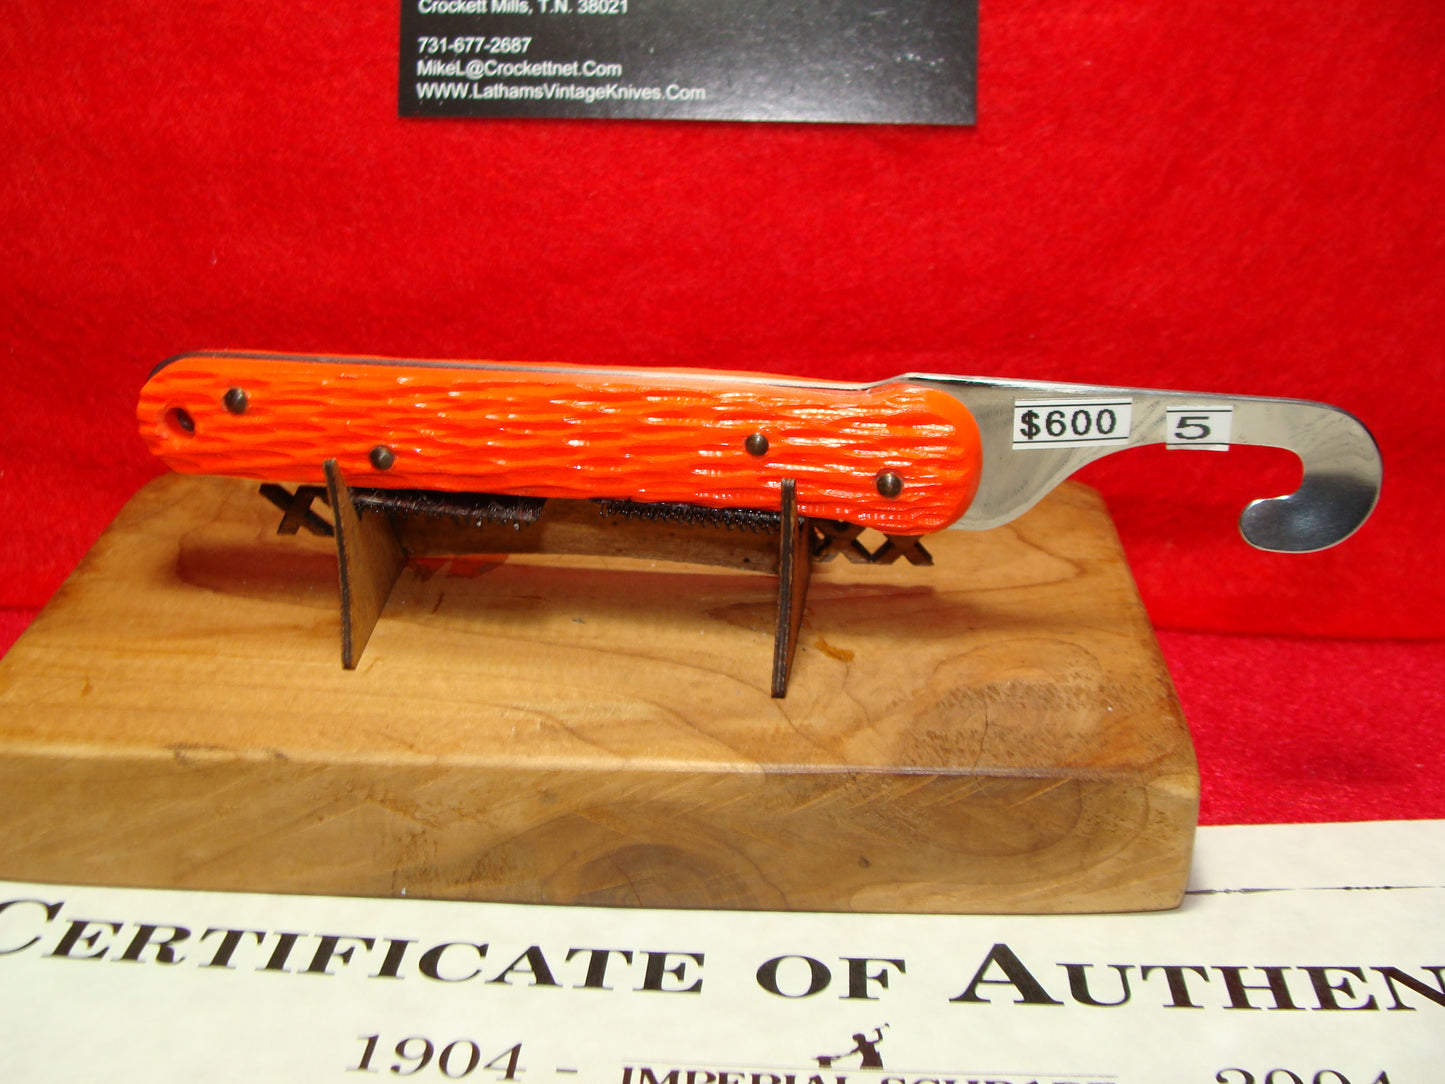 SCHRADE WALDEN NY 1946-76 PROTOTYPE MC1 OFFSET NON FOLDING PARACHUTE SHROUD CUTTER NON AUTOMATIC KNIFE MILITARY ORANGE DELRIN HANDLES PART OF THE SCHRADE FACTORY COLLECTION